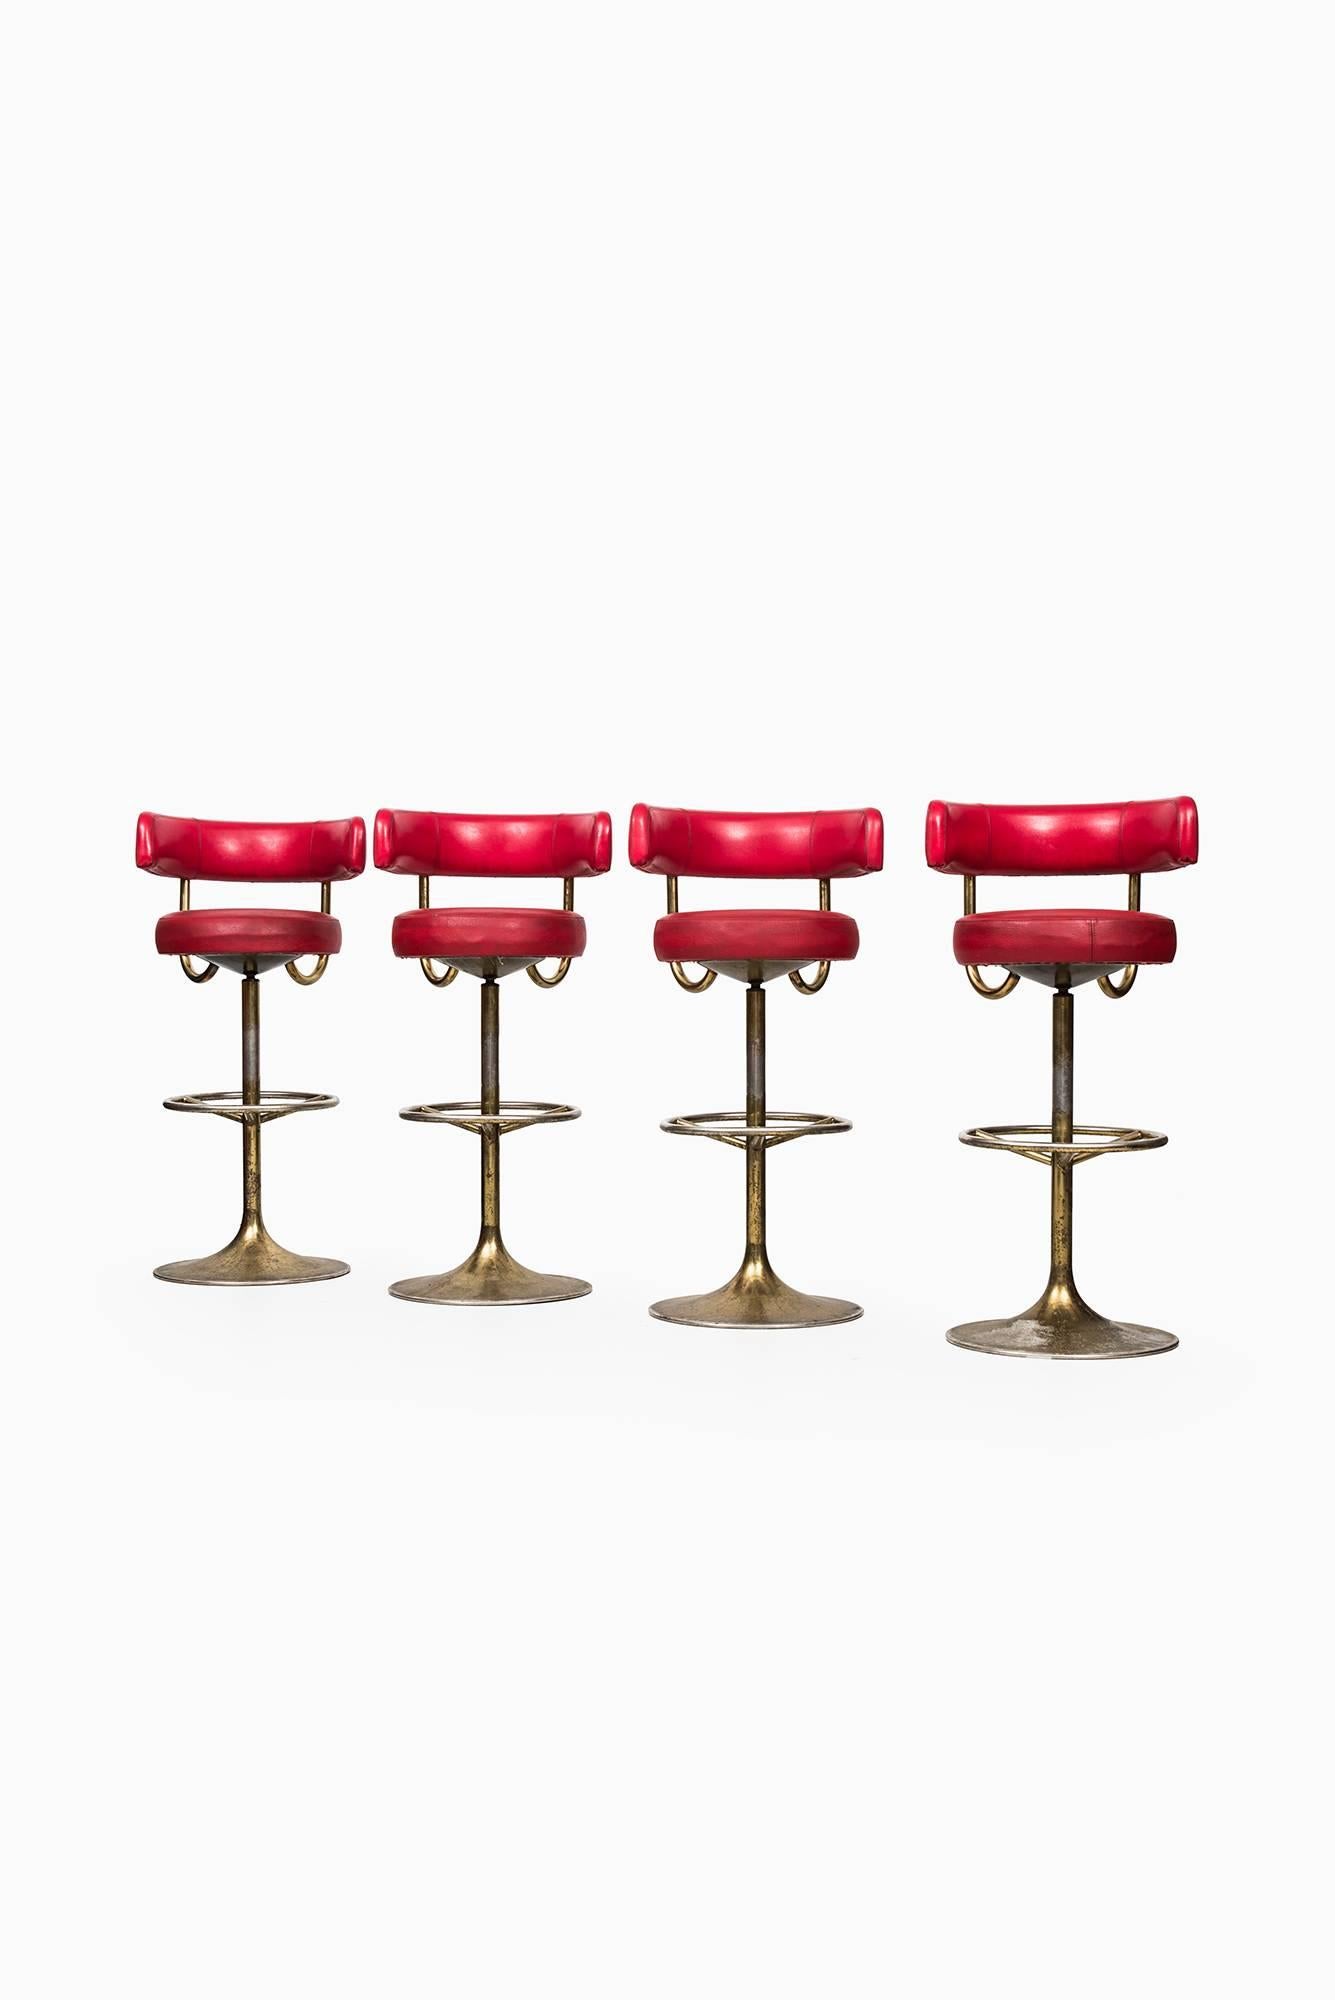 A set of four high bar stools designed by Börje Johansson. Produced by Johansson design in Markaryd, Sweden.